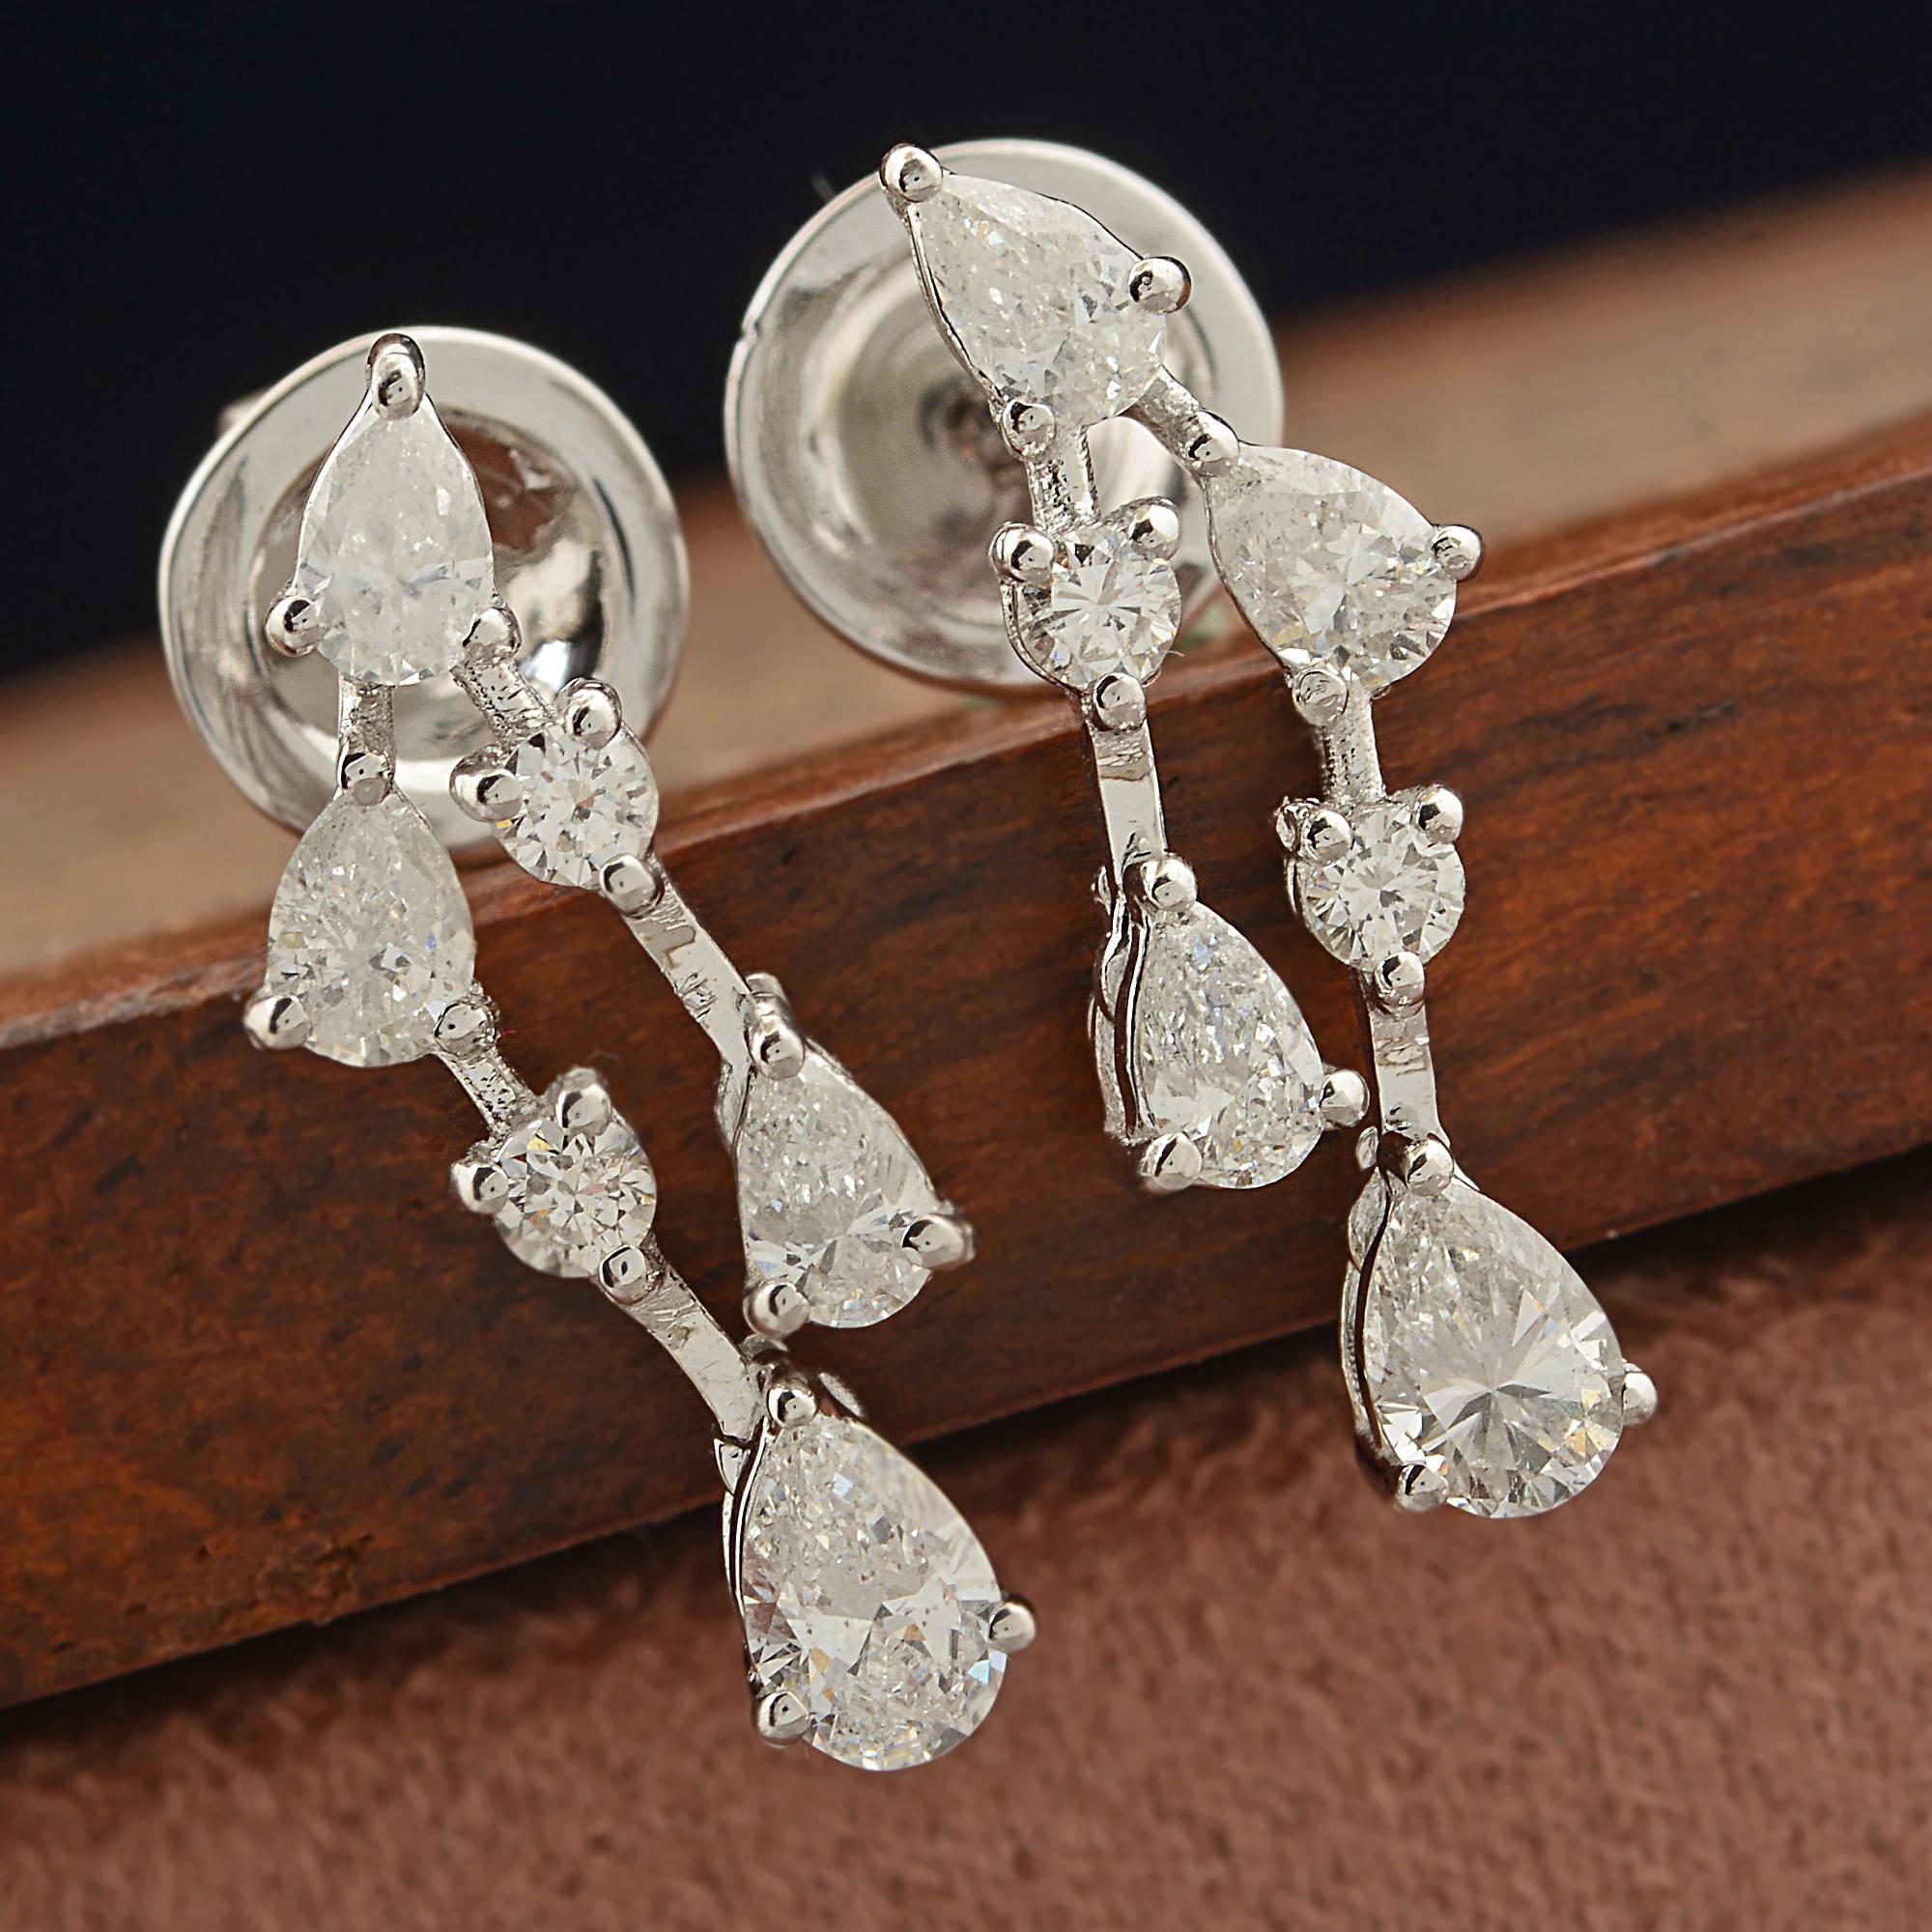 Indulge in the epitome of elegance with these exquisite 1.10 Carat Pear & Round Diamond Dangle Earrings crafted in 14 Karat White Gold. Radiating sophistication and glamour, these dainty yet dazzling earrings are a testament to fine jewelry